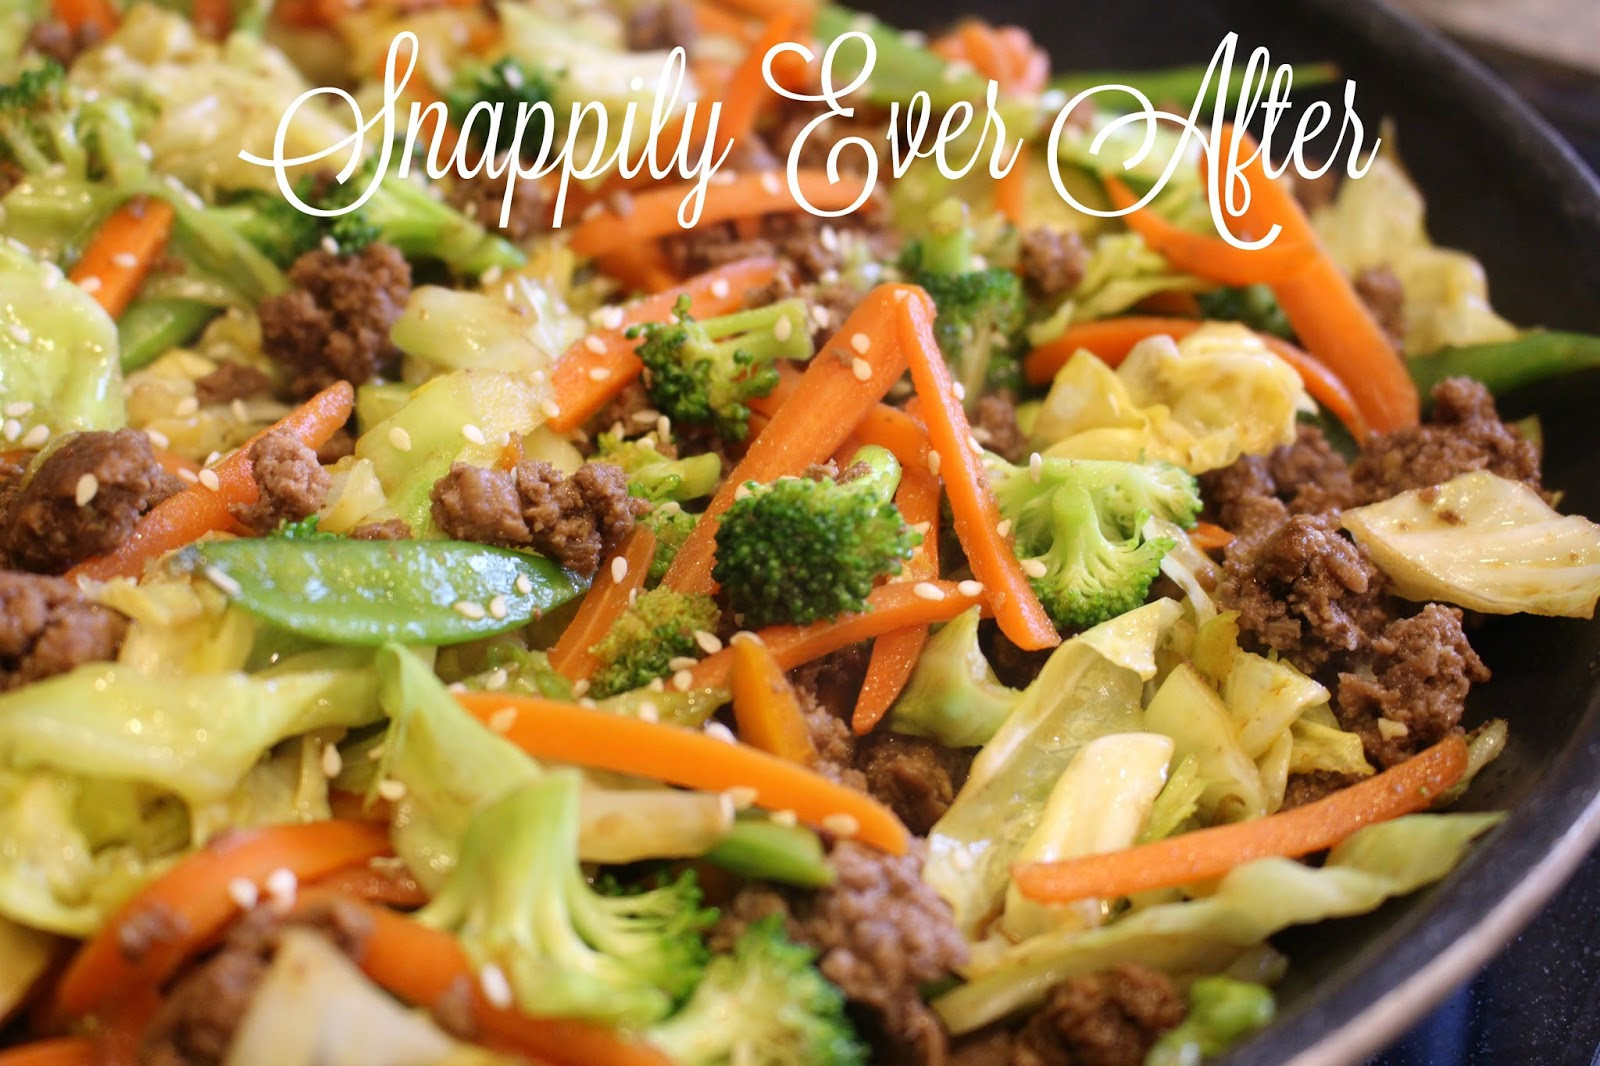 Beef And Cabbage Stir Fry
 Snappily Ever After Beef and Cabbage Stir Fry